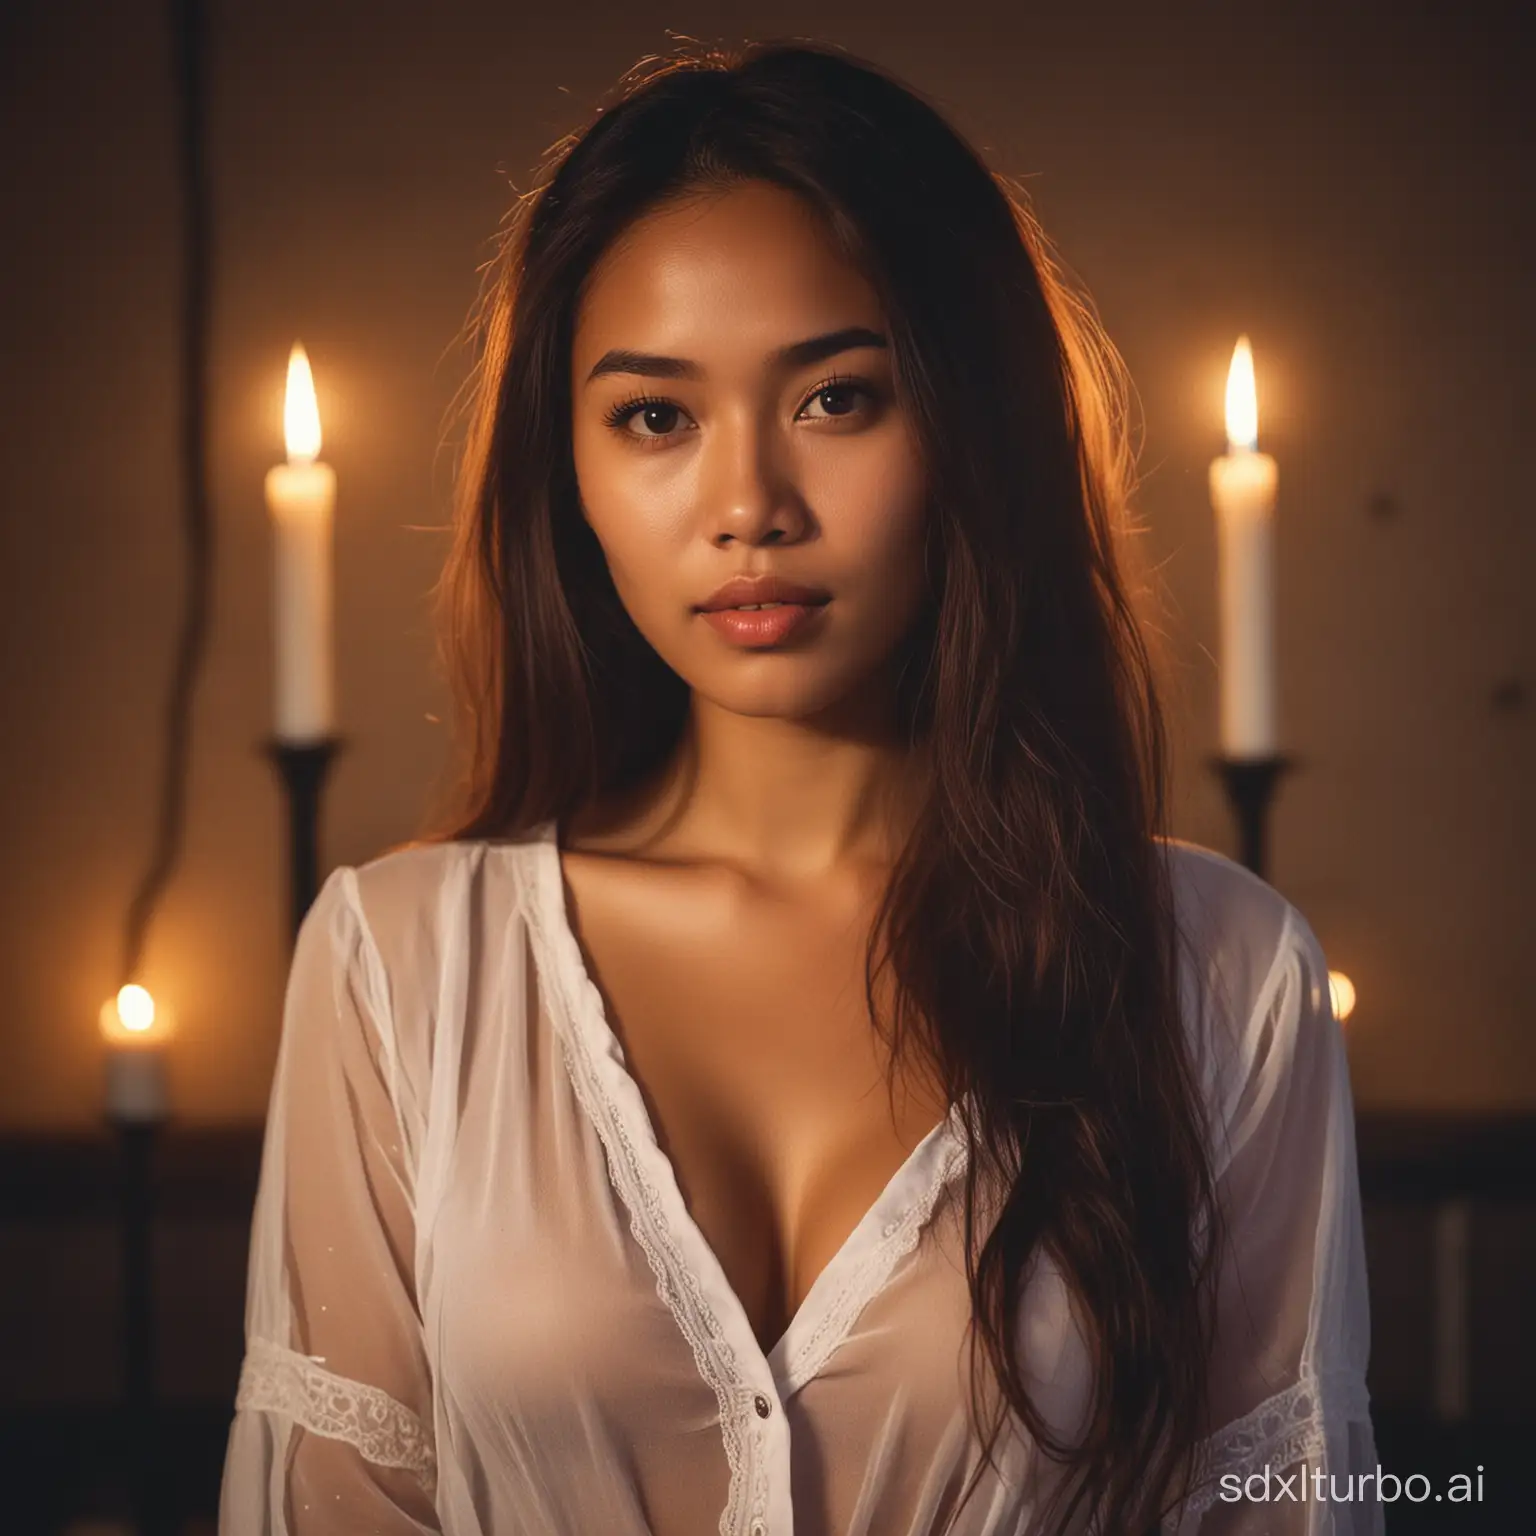 Young Filipina woman. Open front shirt. Medieval time. Candle lights. Portrait. Soft and Silk hair. Sexy. Revealing. Film grain. Bokeh